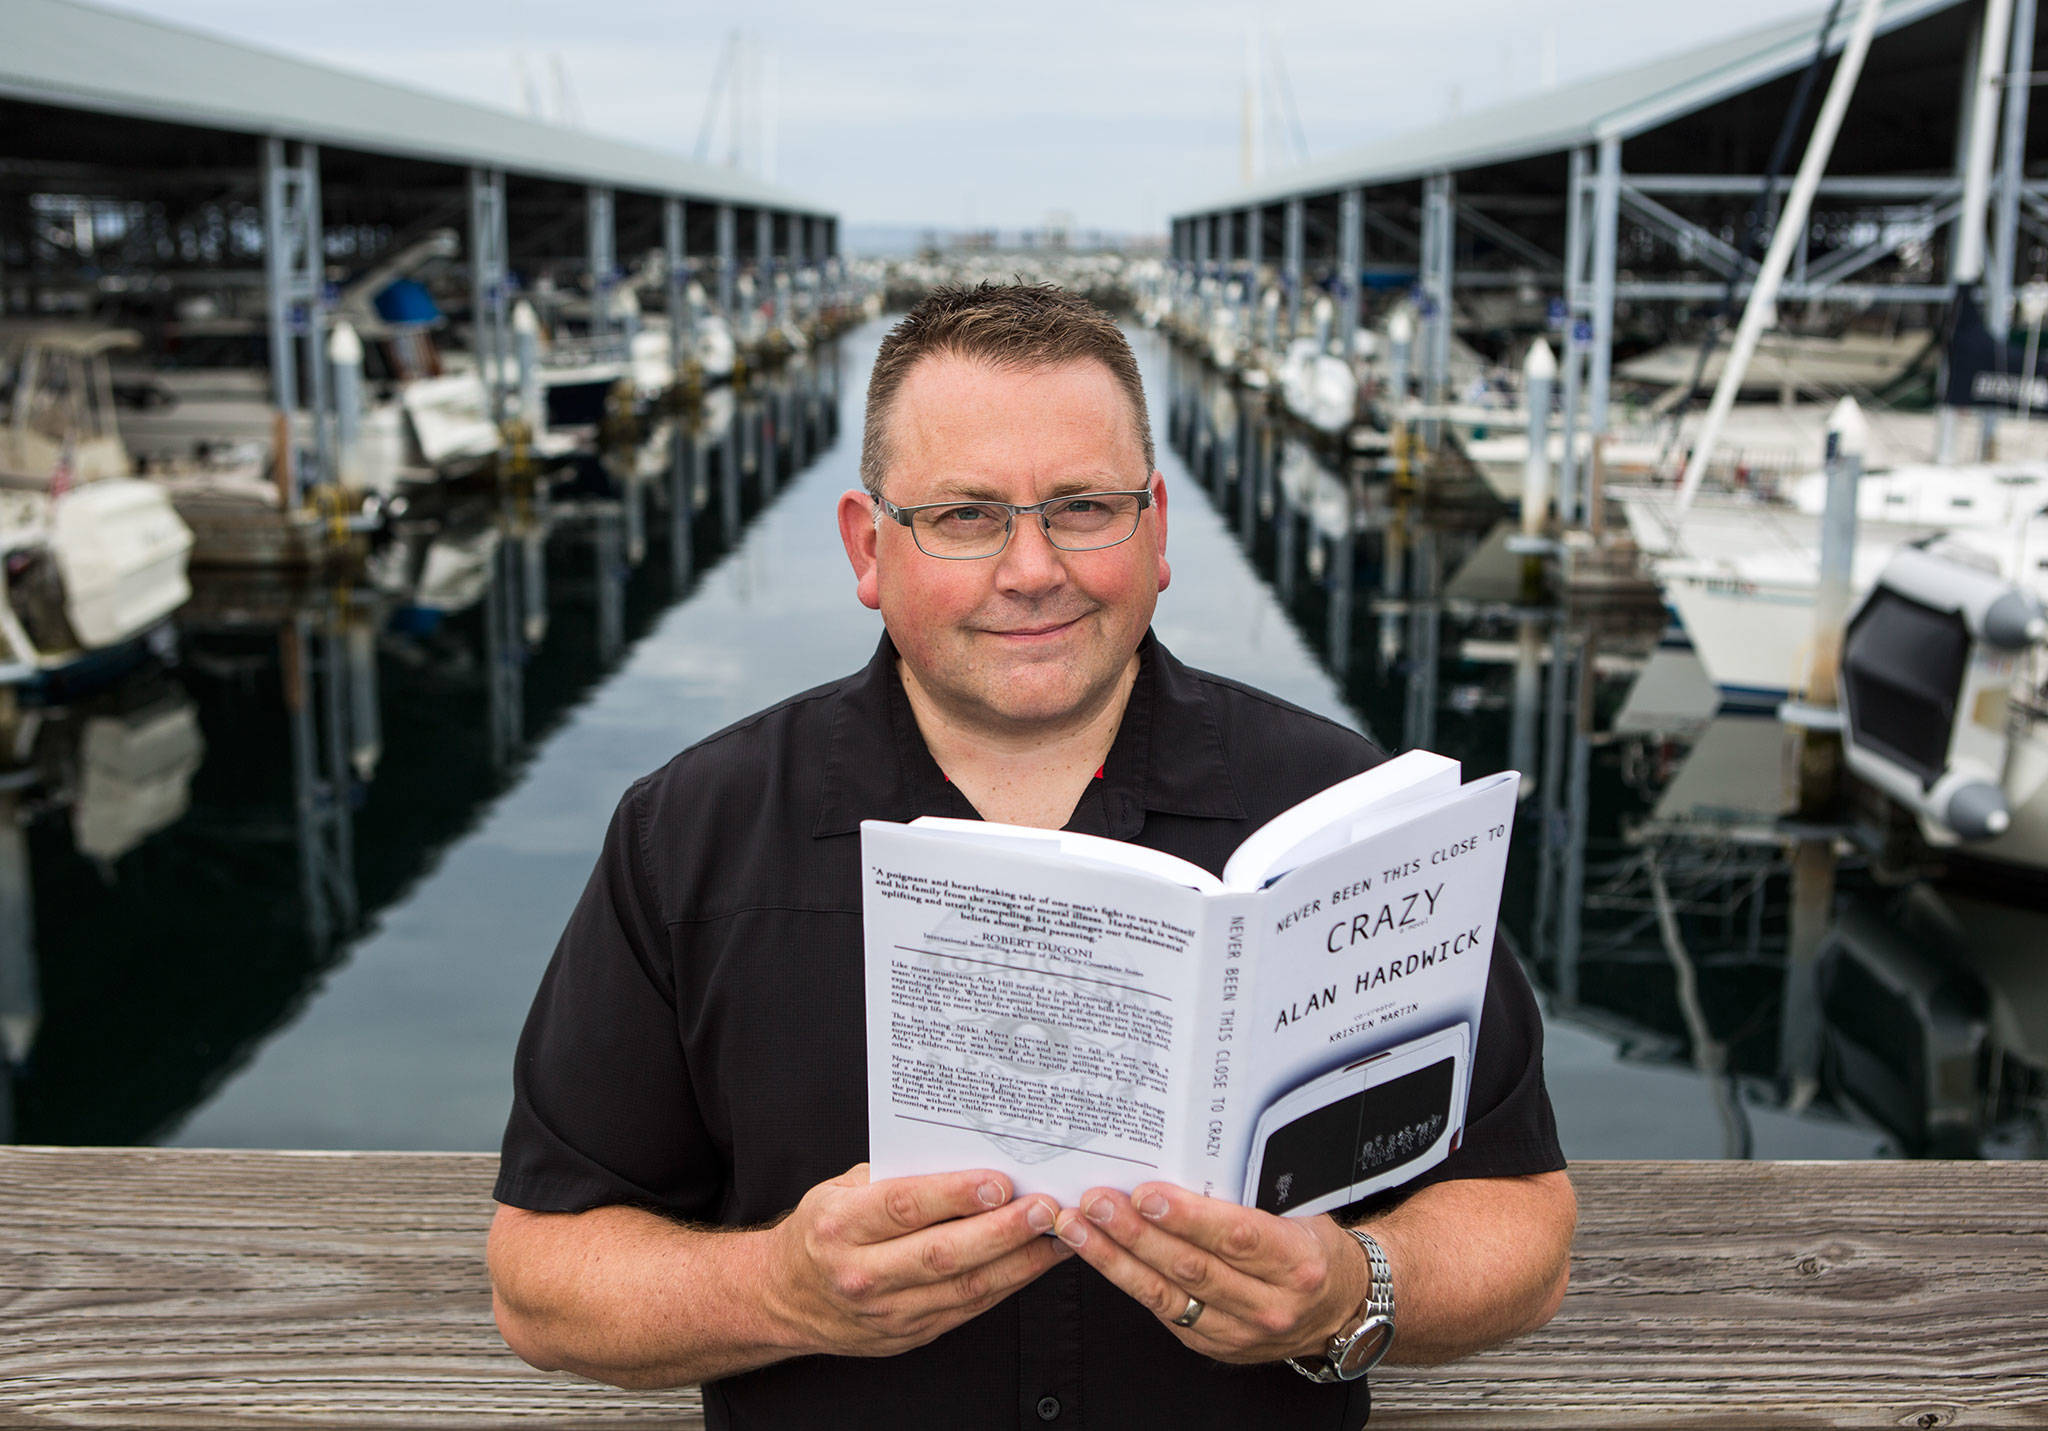 Alan Hardwick, author of “Never Been This Close To Crazy,” in Edmonds next to the marina where he keeps his boat, “PostMate,” named after a scene in his book. (Olivia Vanni / The Herald)